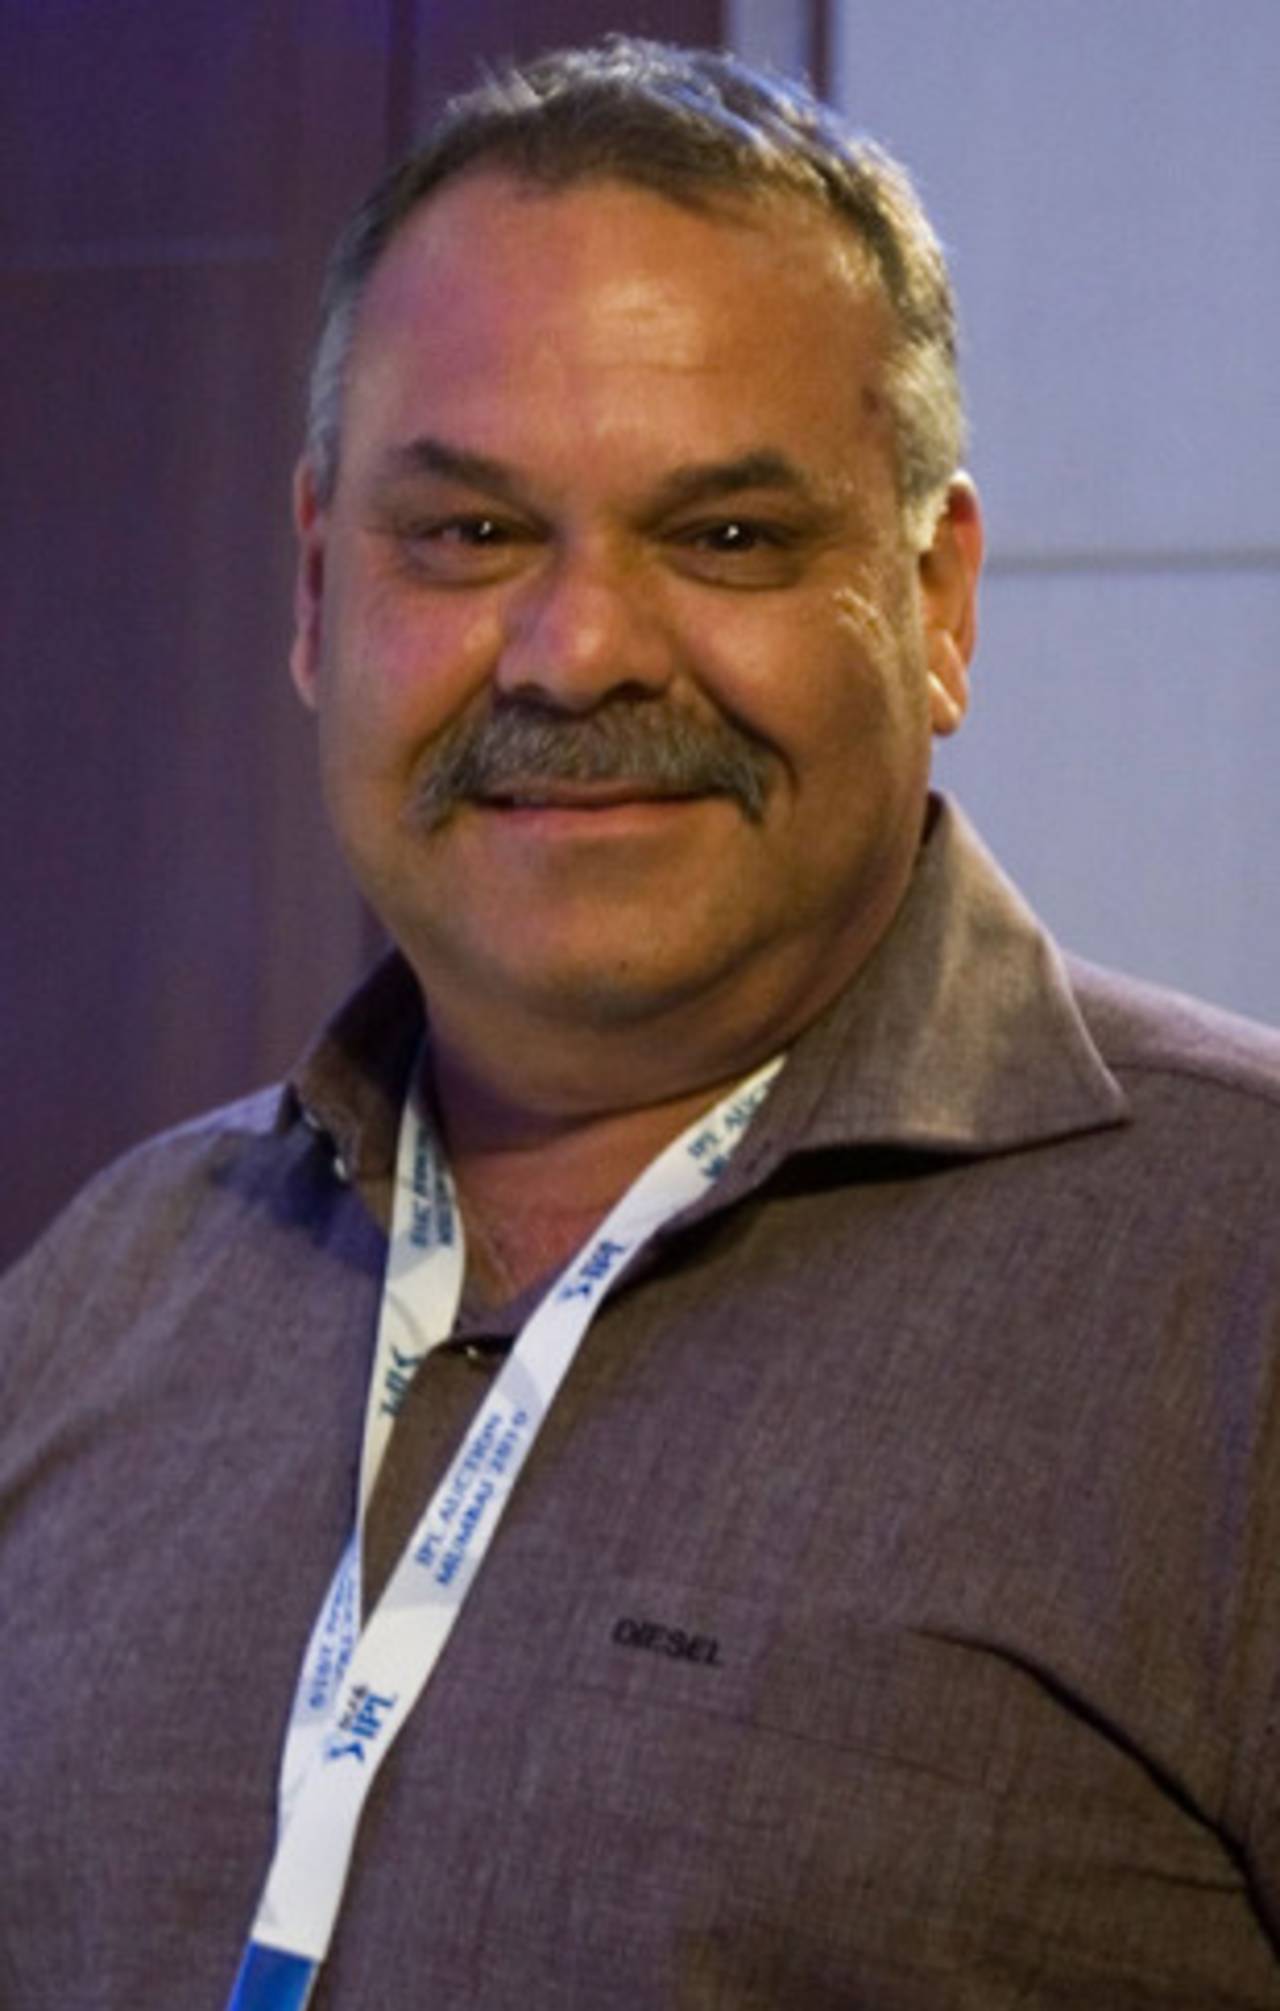 KKR coach Dav Whatmore is all smiles after snapping up Shane Bond, Mumbai, January 19, 2010